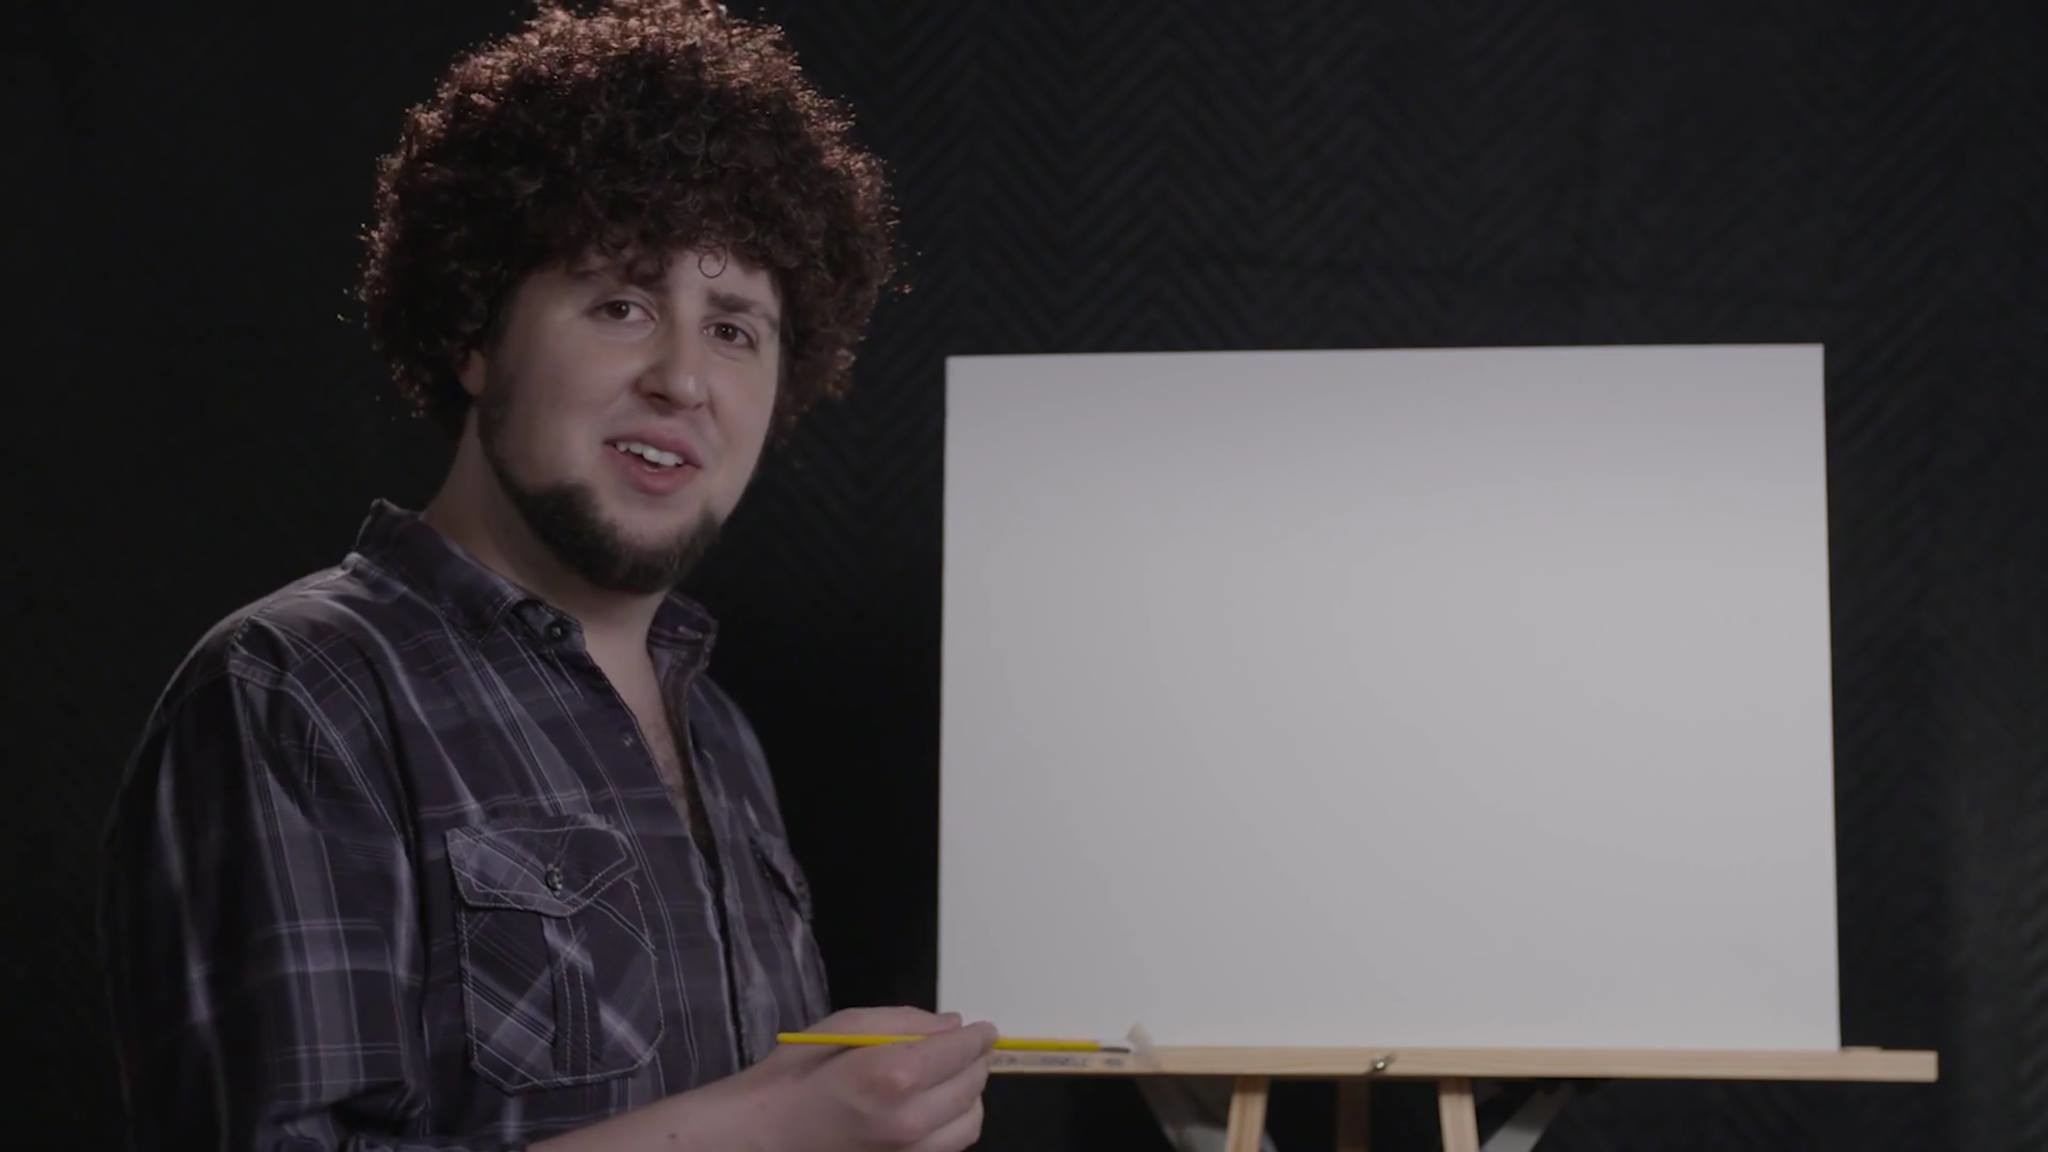 2048x1152 Image ContentPsBattle: JonTron dressed up as Bob Ross with an empty canvass  ...